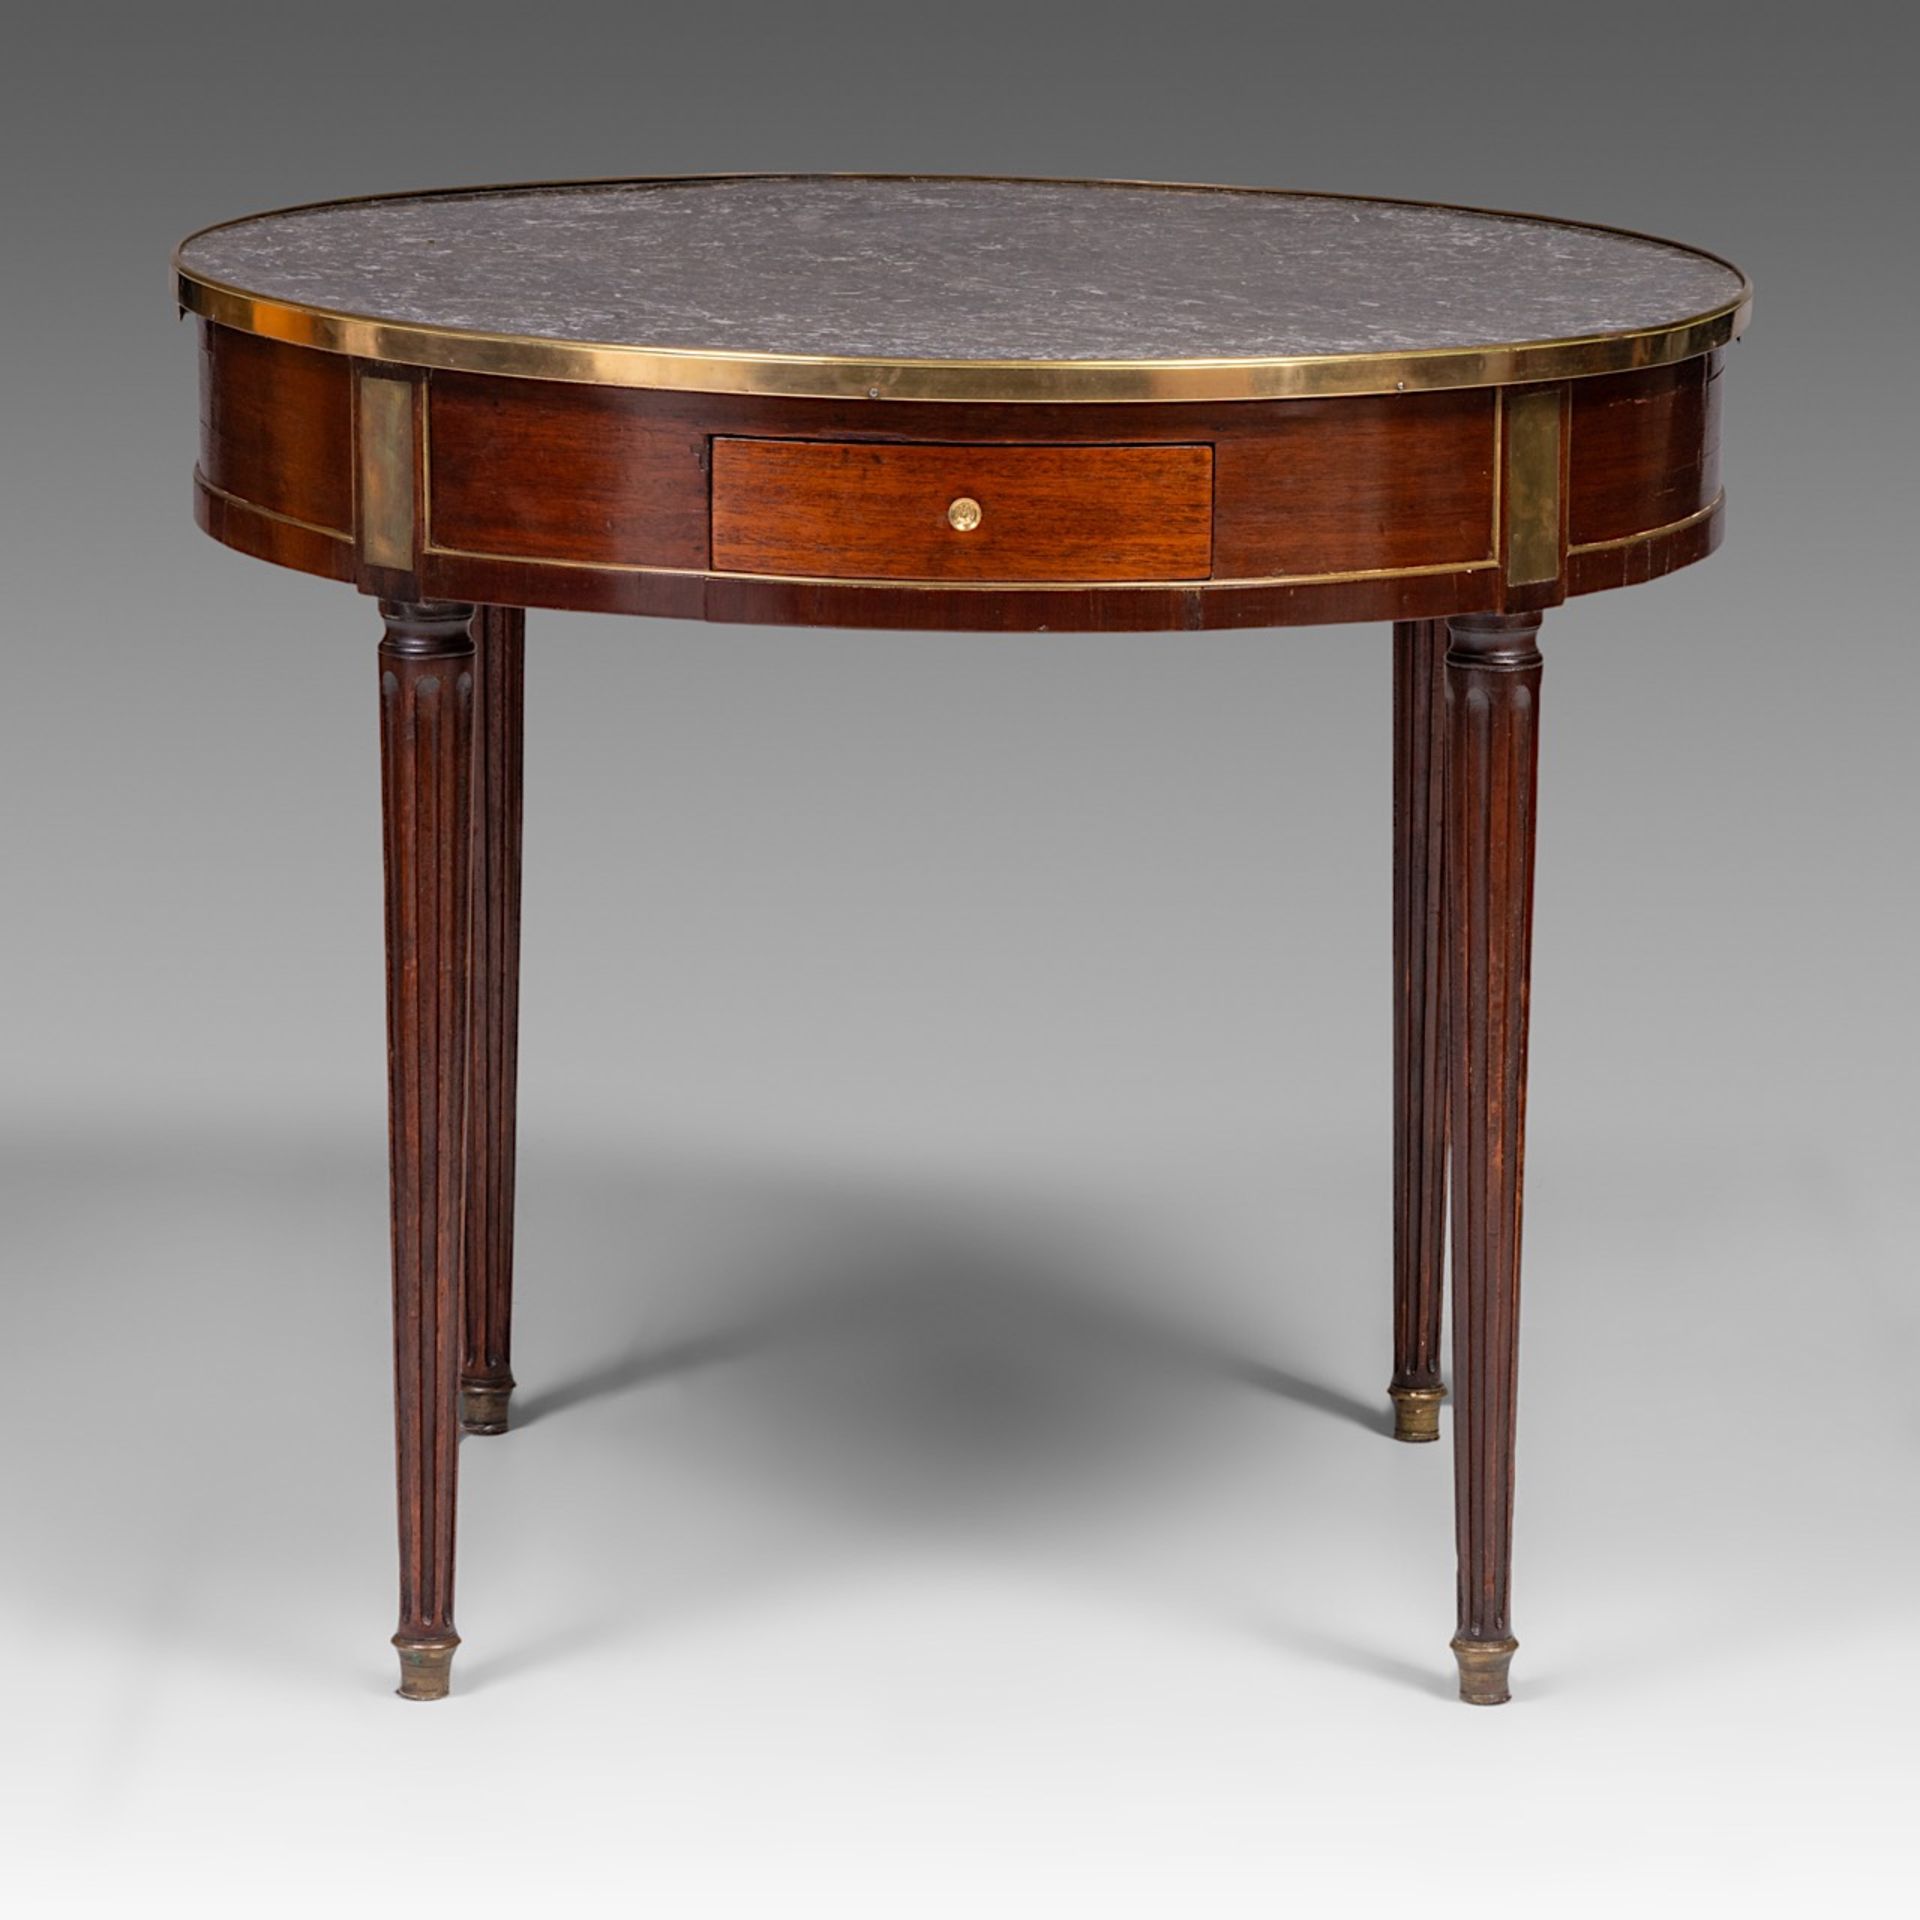 A Louis XVI bouillotte table with a marble top and gilded bronze mounts, H 73 - dia 85 cm - Image 4 of 8